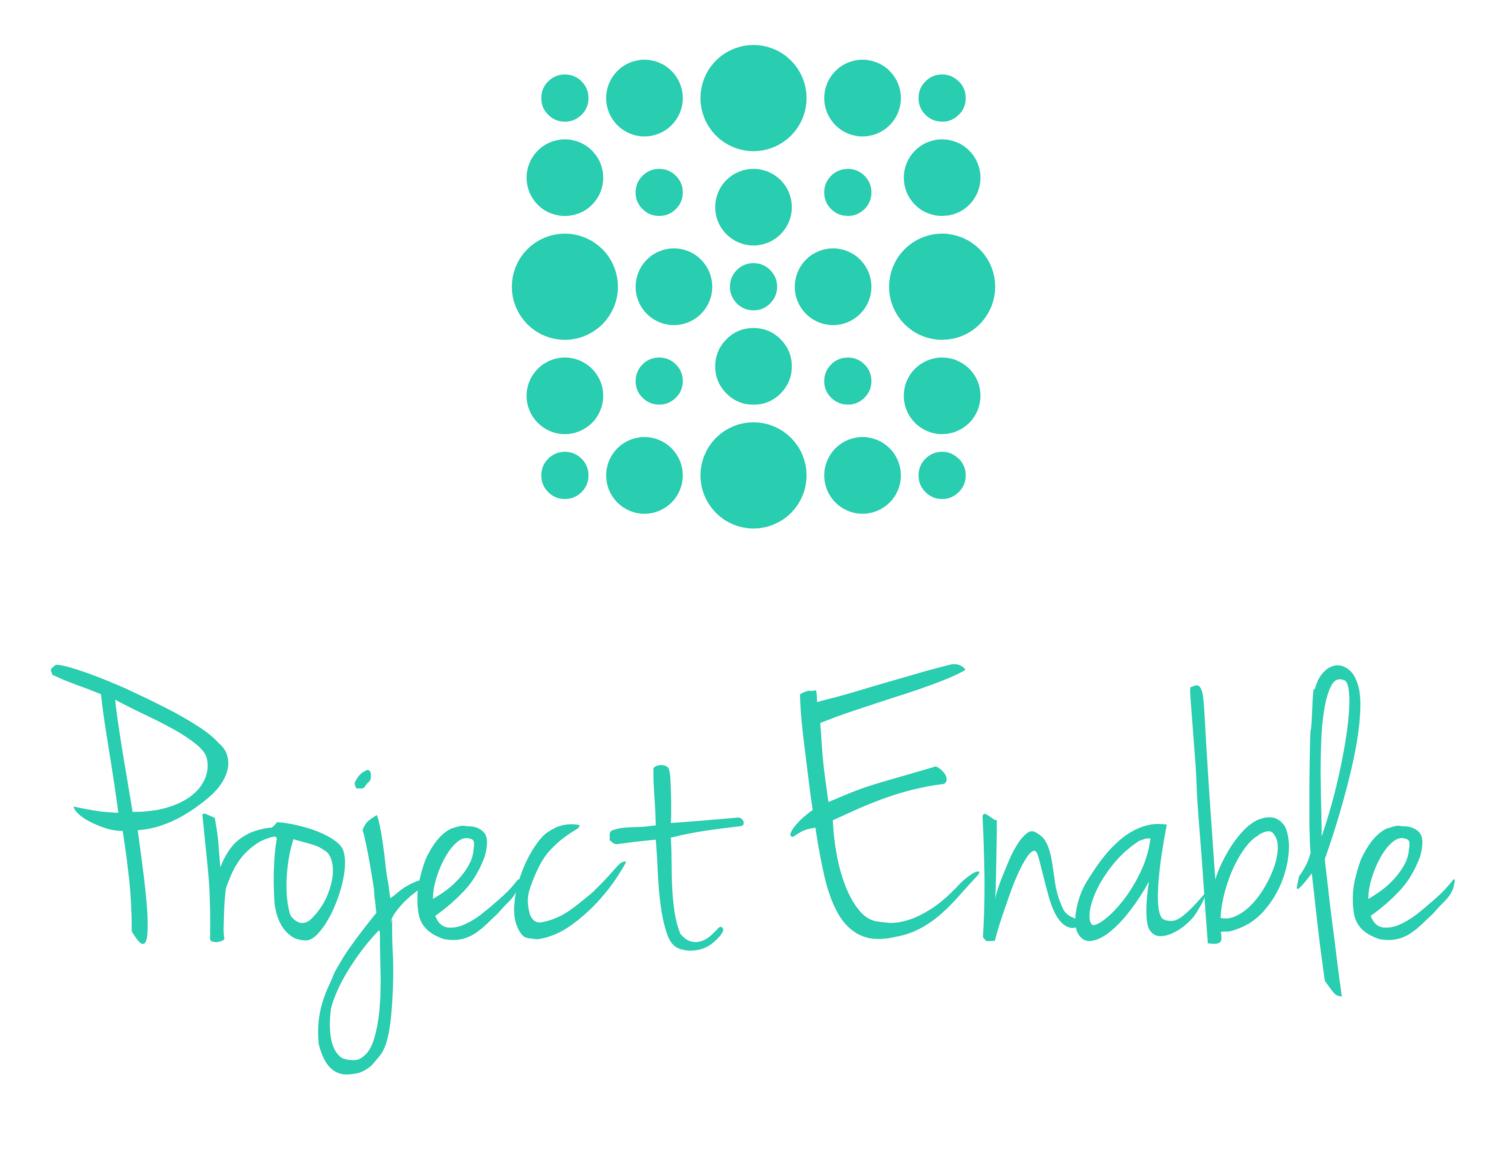 Project Enable